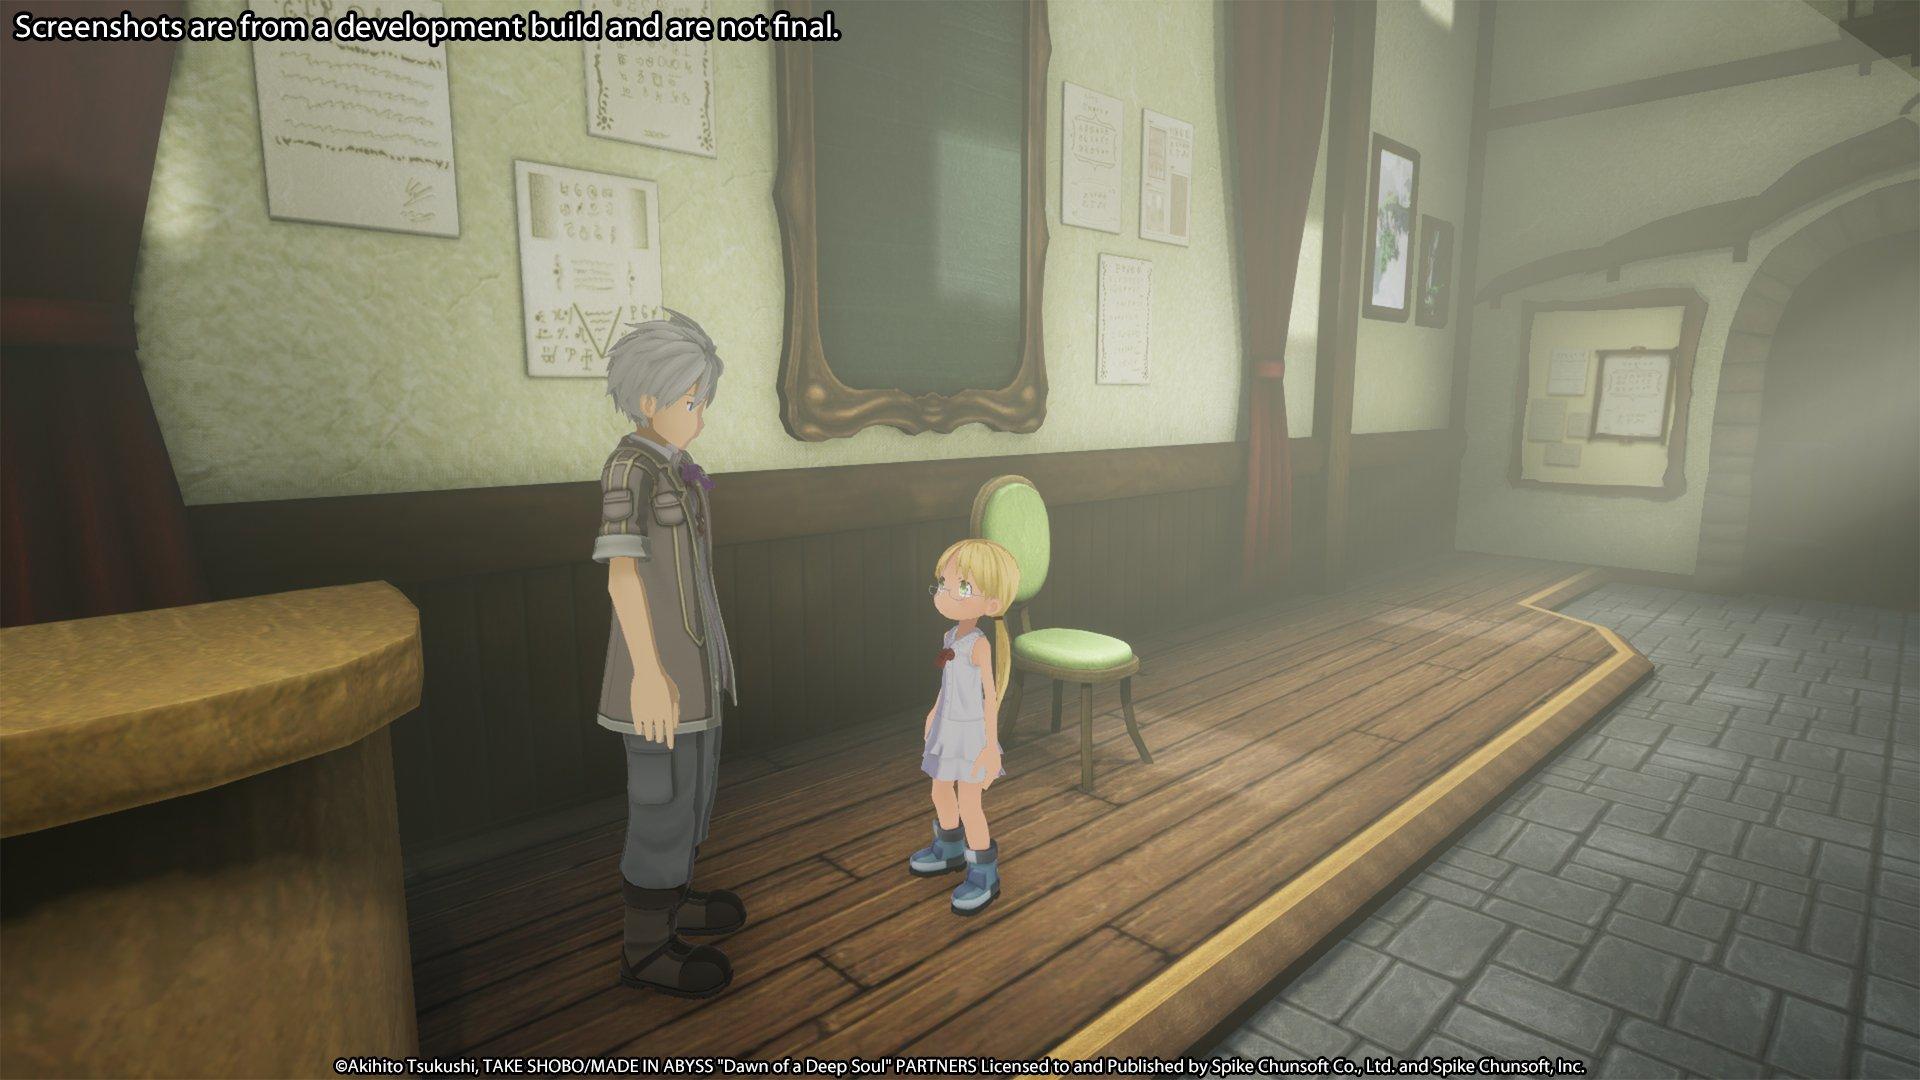 Made in Abyss: Binary Star Falling into Darkness - PlayStation 4